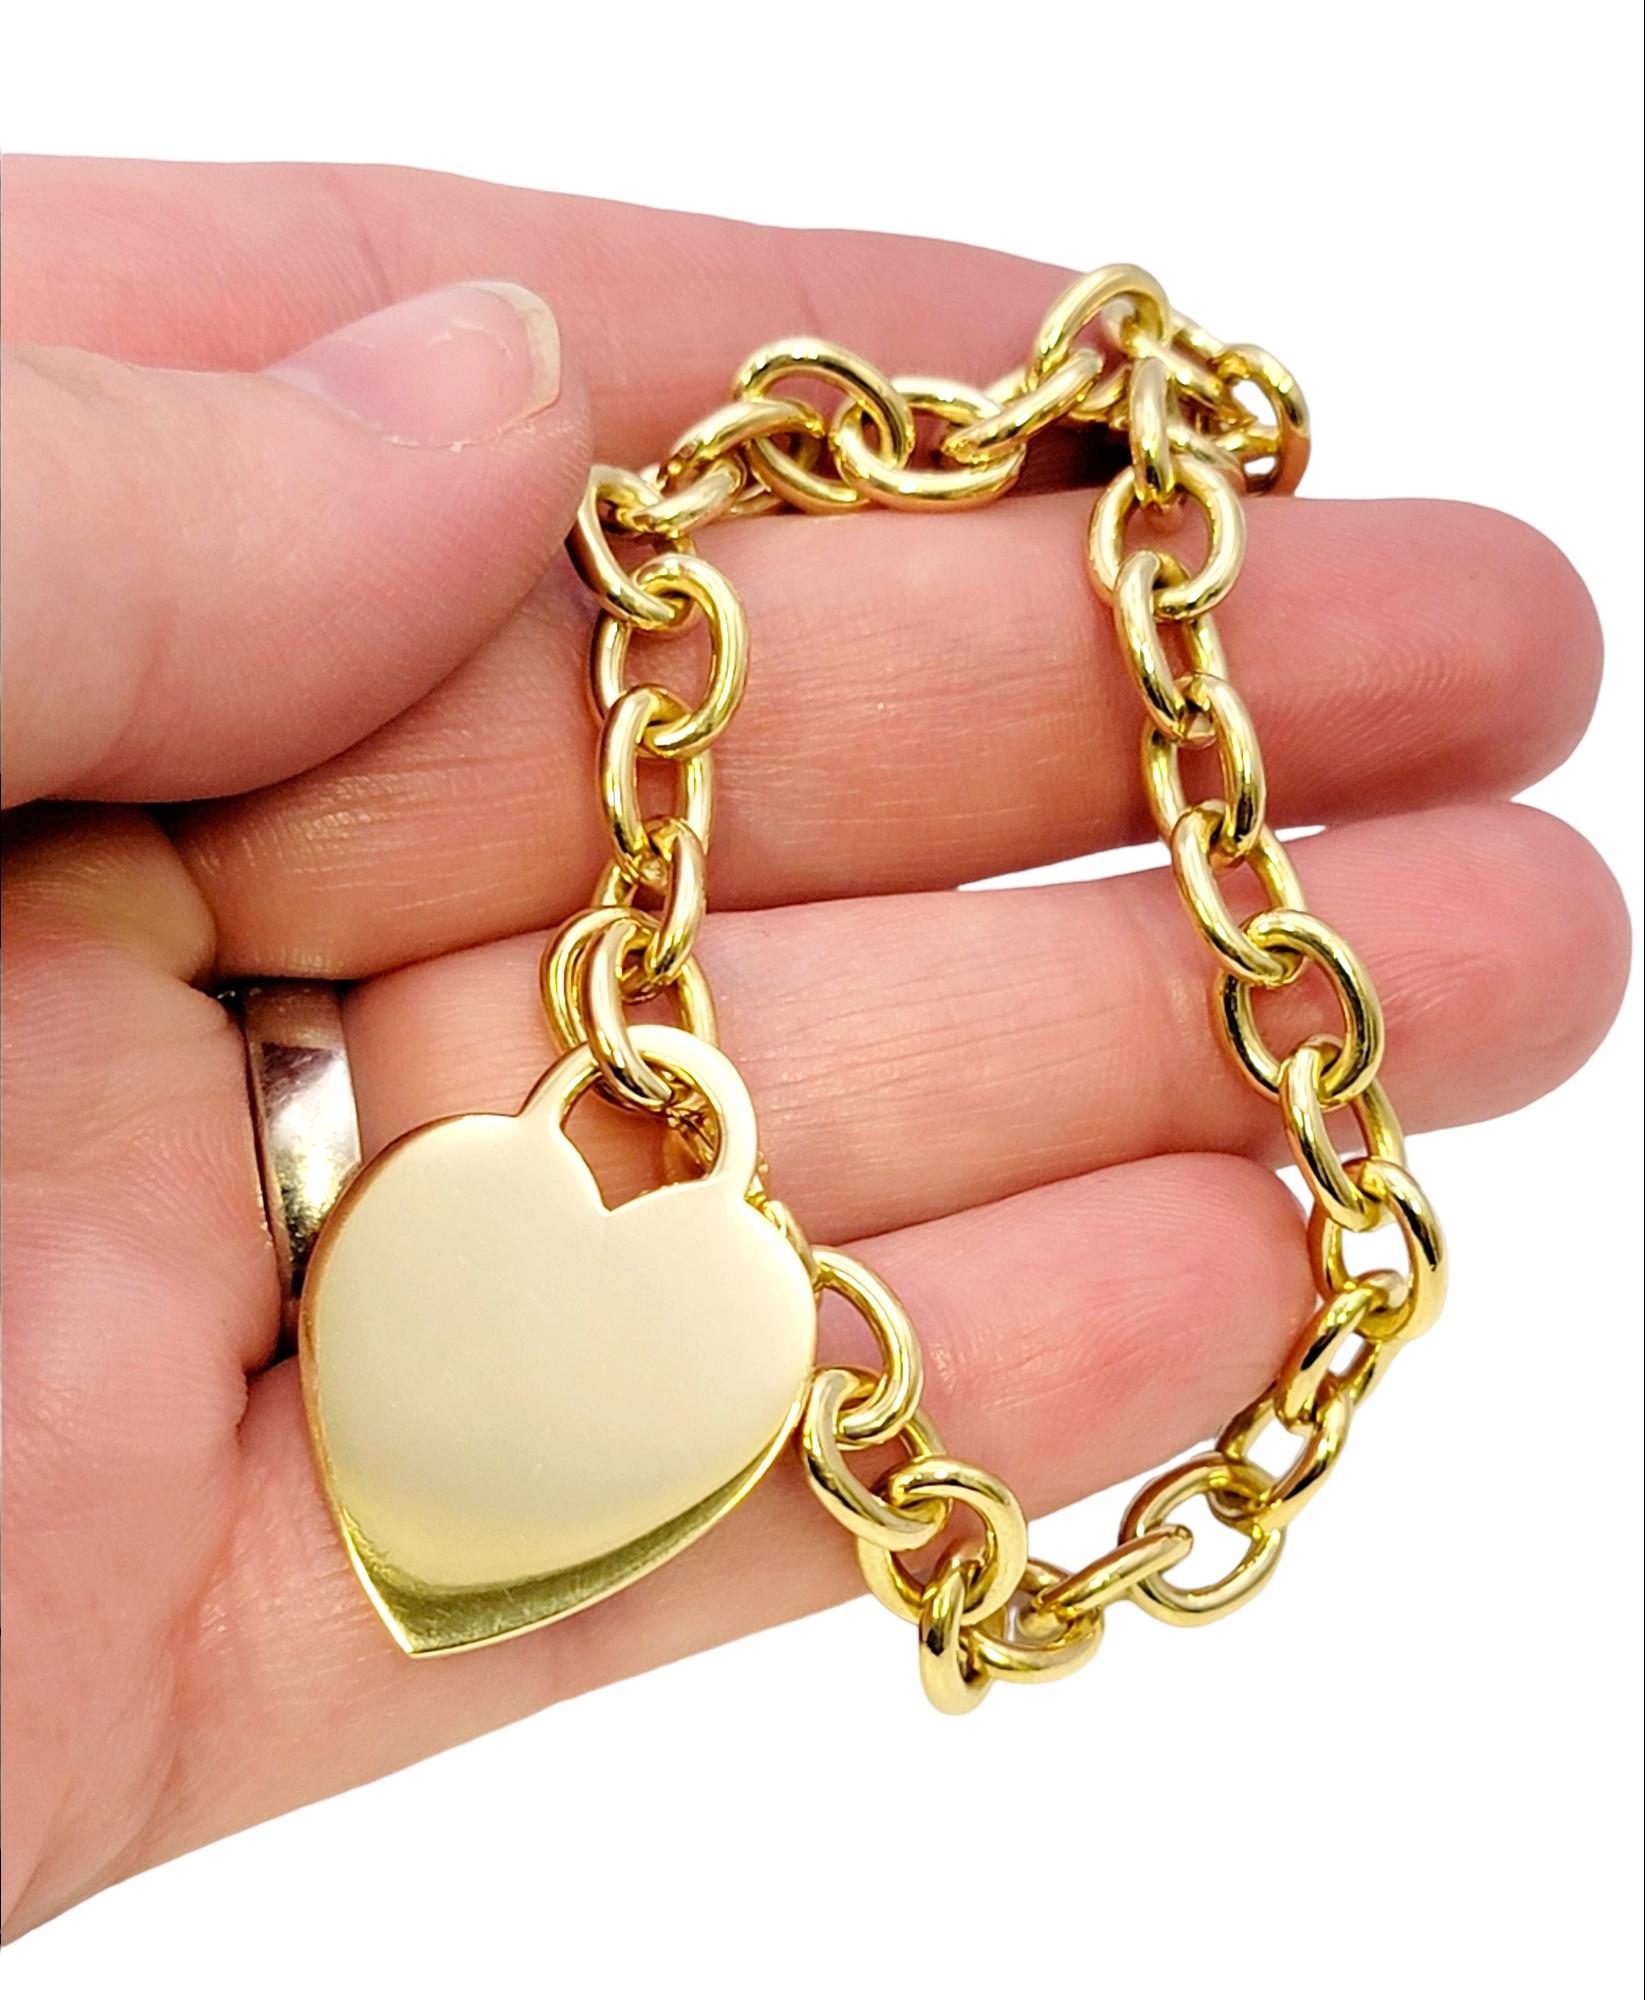 Tiffany & Co. Heart Tag Chain Link Bracelet in Polished 18 Karat Yellow Gold For Sale 2